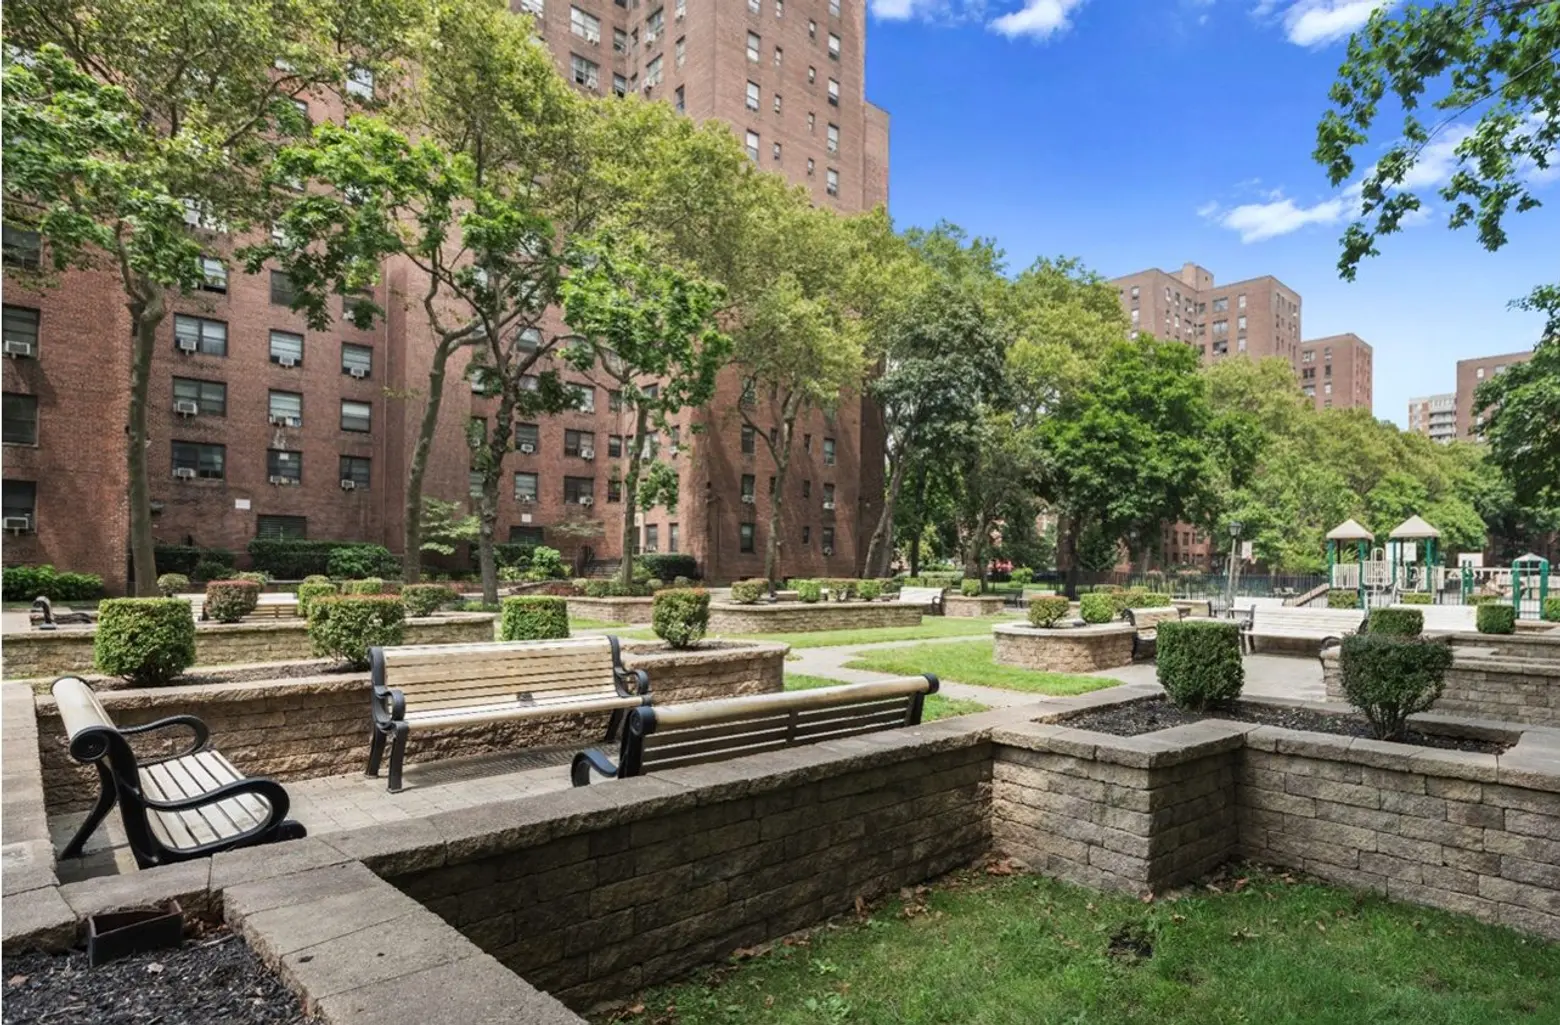 Waitlist opens for middle-income units at East Harlem’s Riverton complex, from $1,968/month